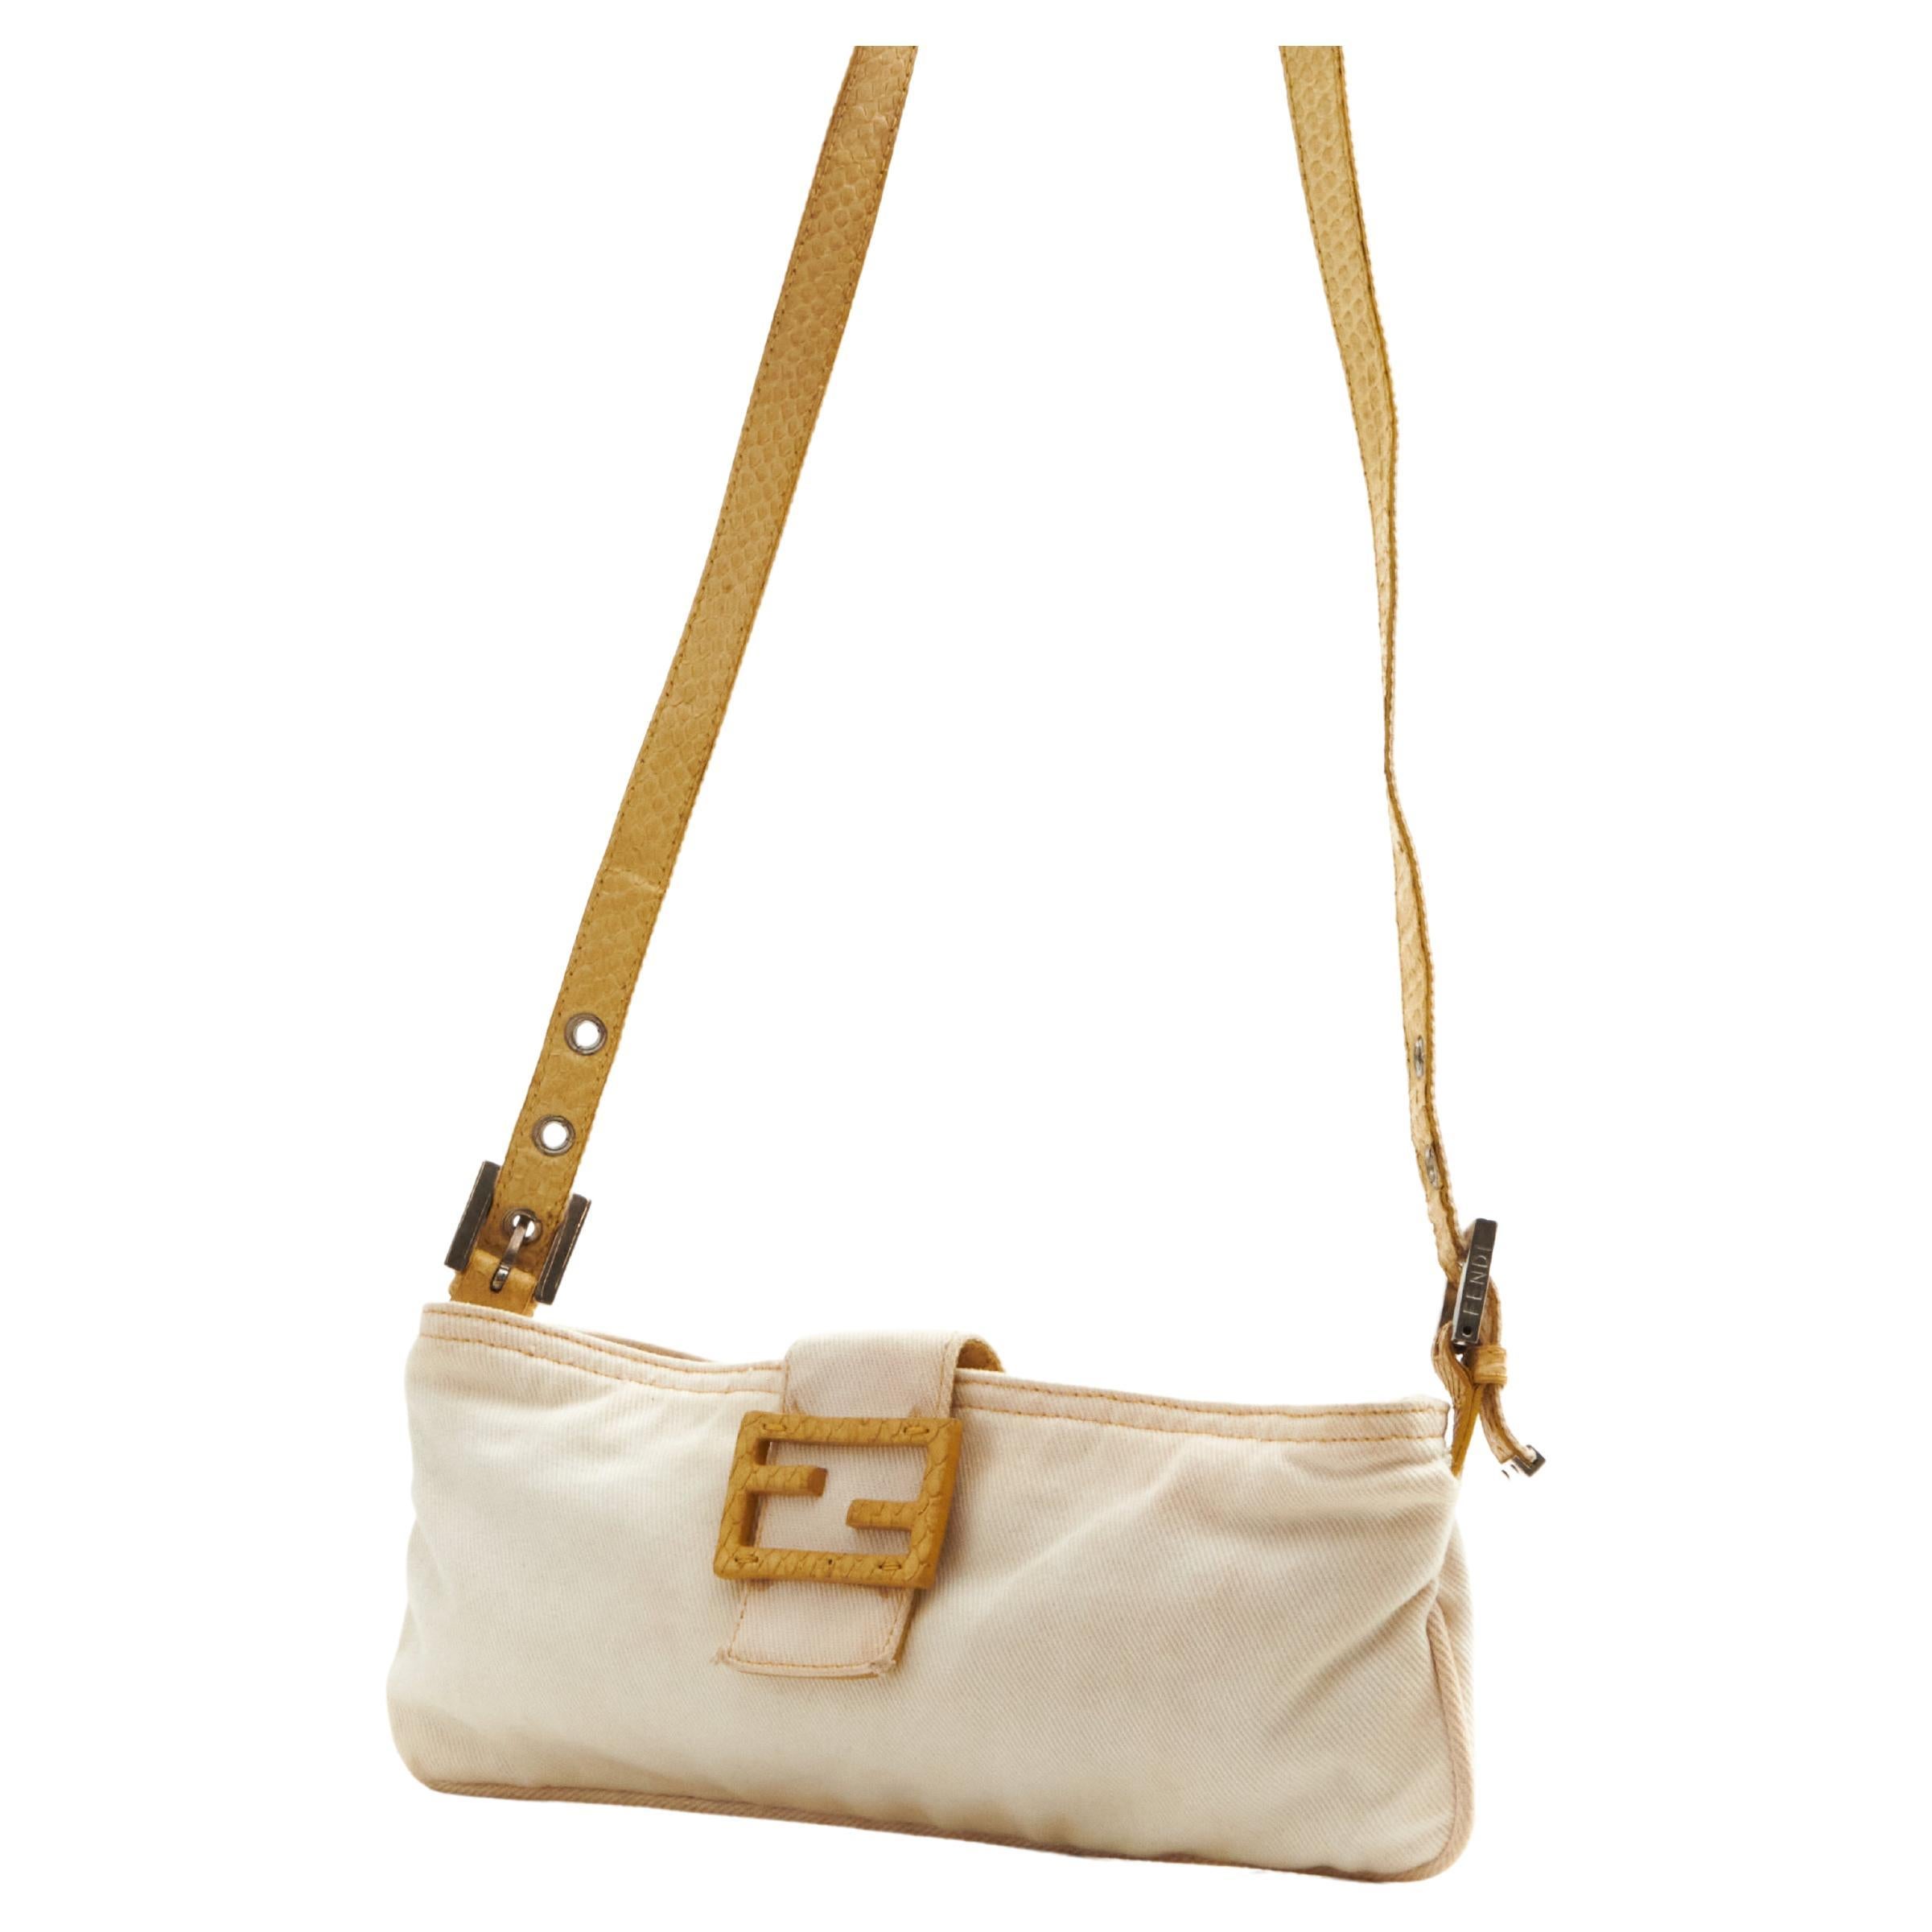 What is the best crossbody purse?